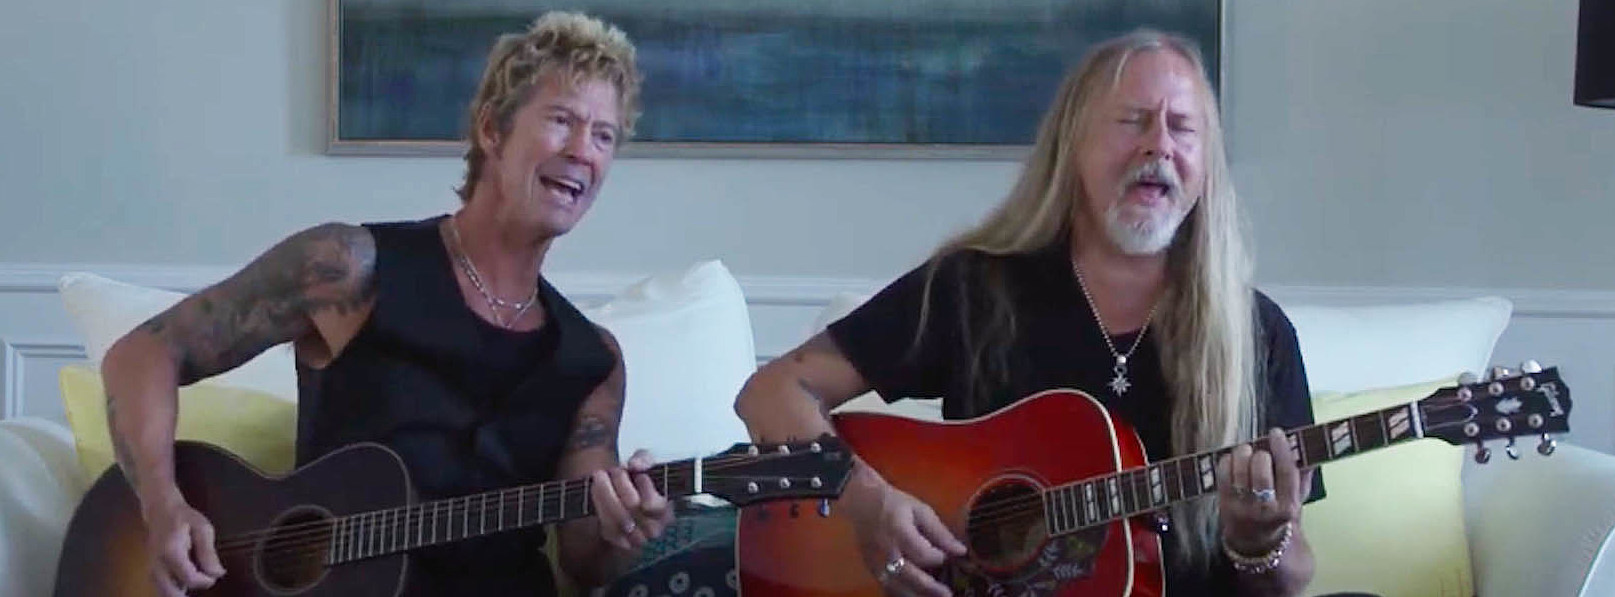 Alice in Chains’ Jerry Cantrell Teases New Project with Duff McKagan